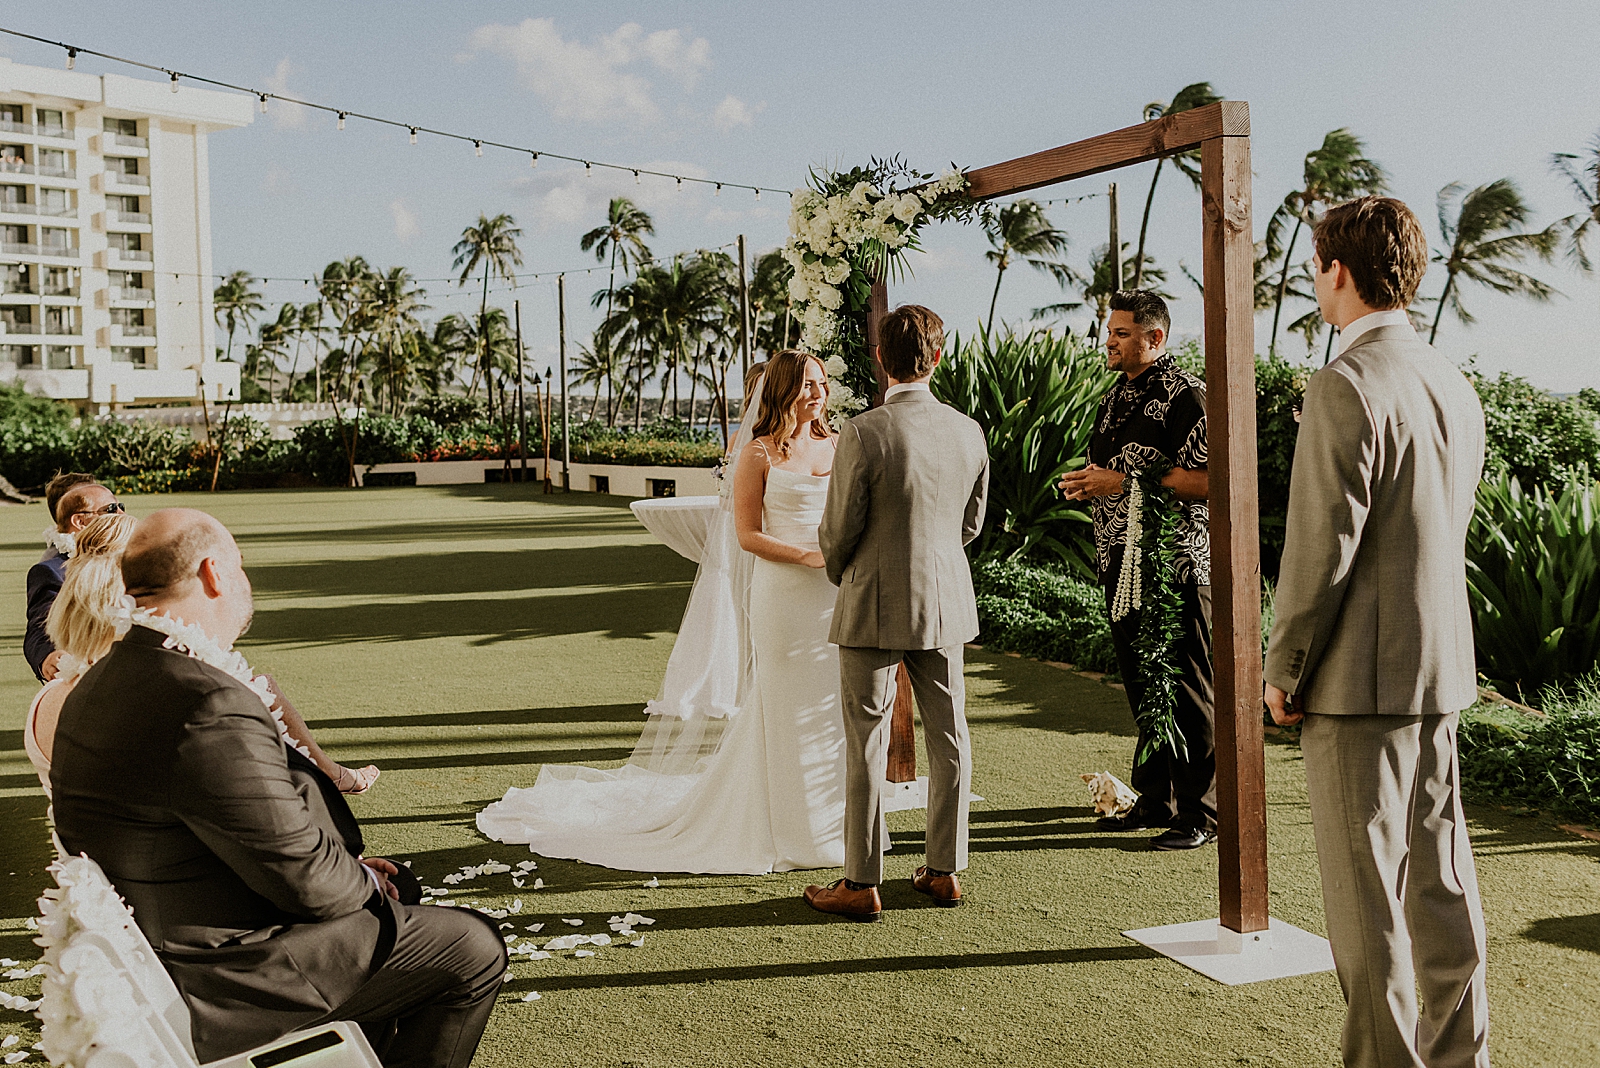 Bride and Groom holding hands and looking at officiant for outdoor Ceremony by greenery and palm trees